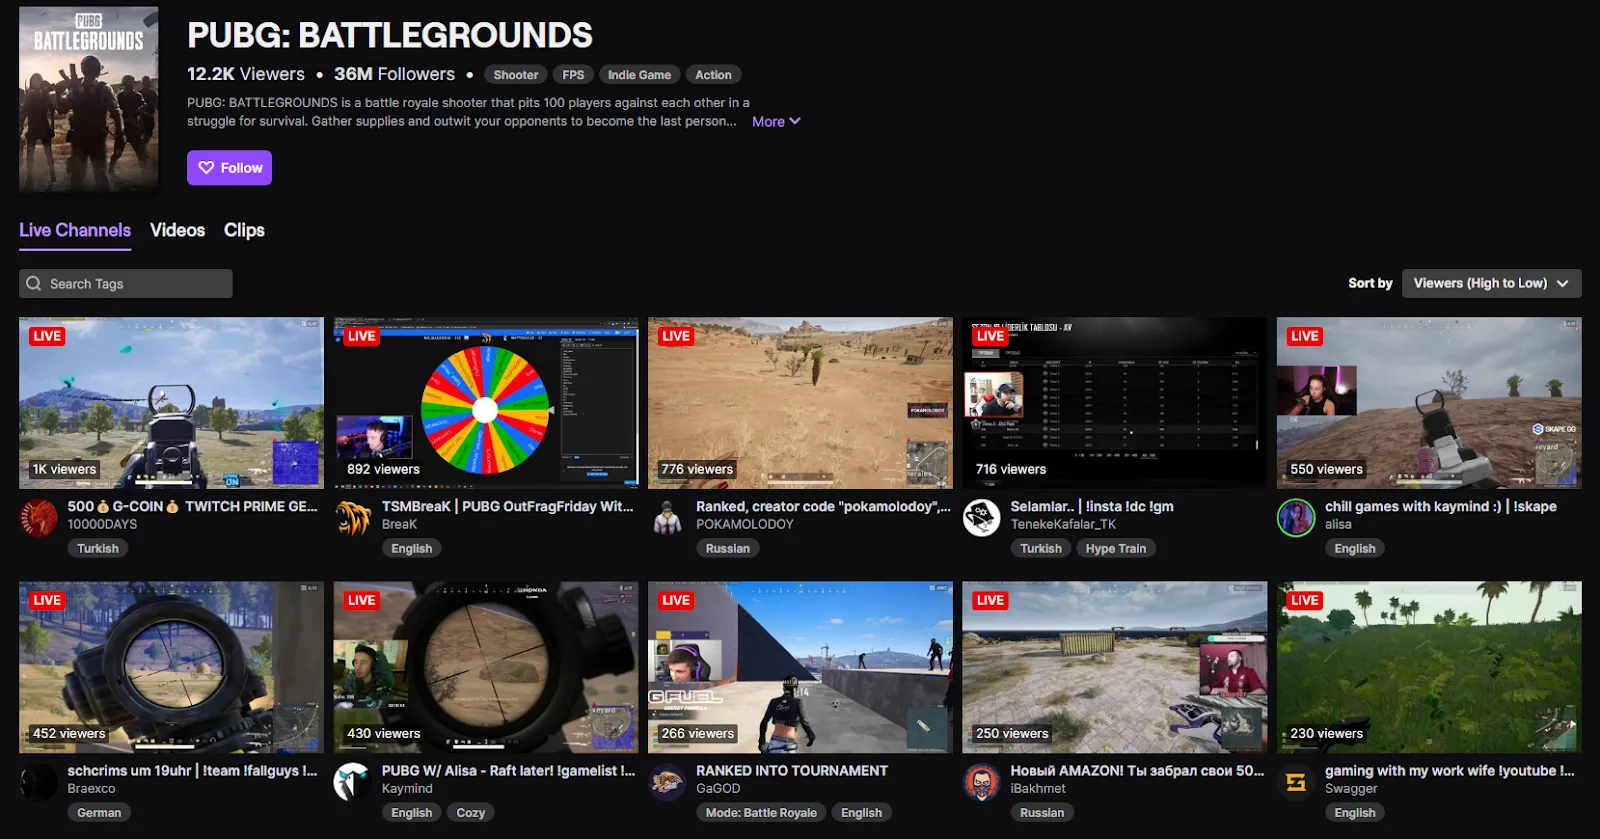 PUBG has a mind blowing 36 million followers on Twitch!